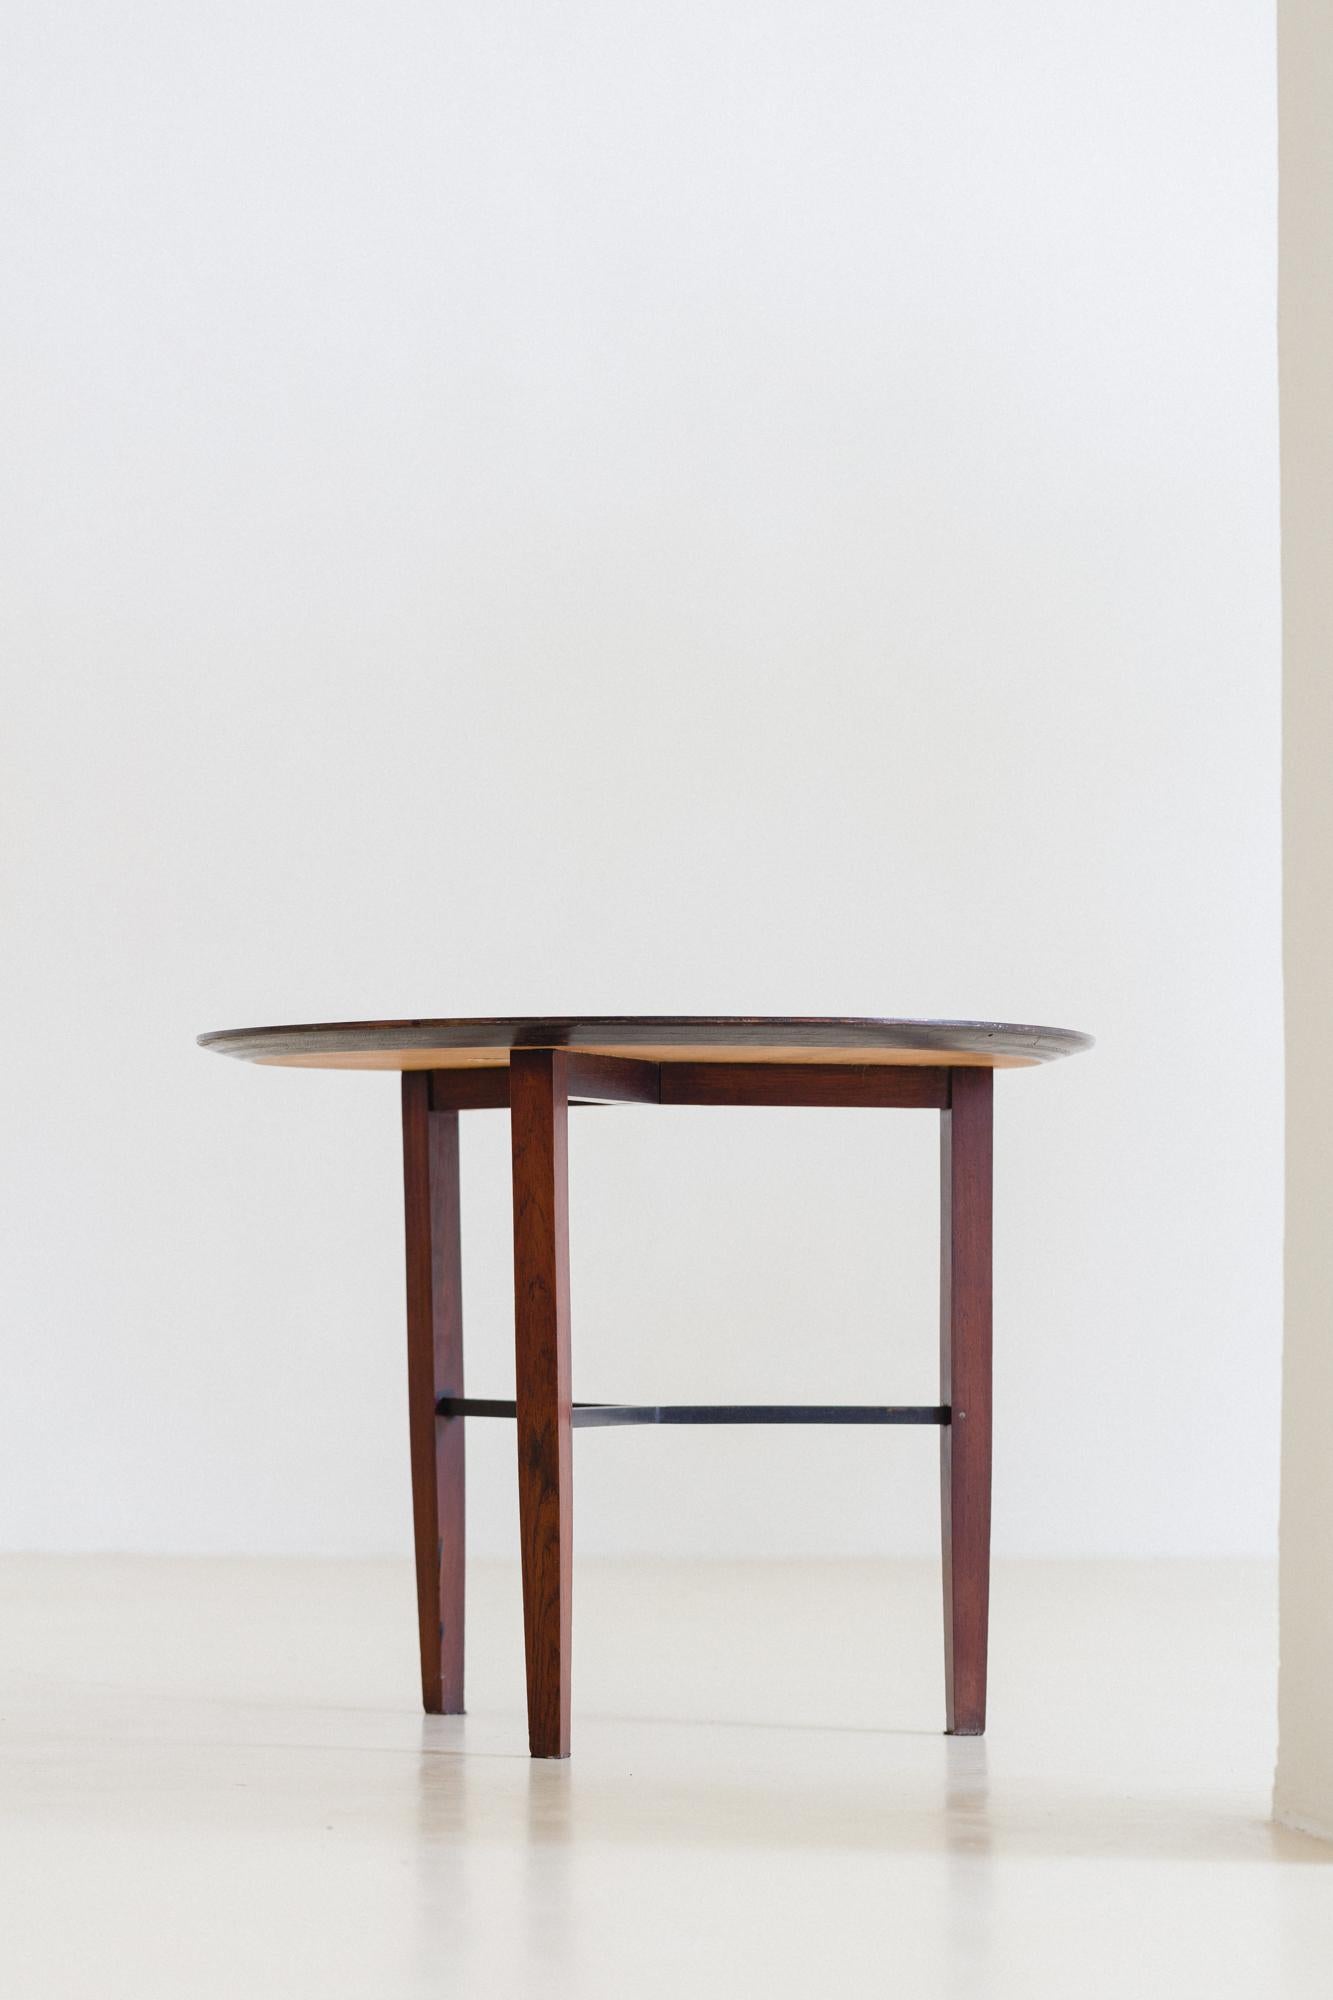 Caviuna Side Table by Carlo Hauner and Martin Eisler, Brazilian Modern Design In Good Condition For Sale In New York, NY